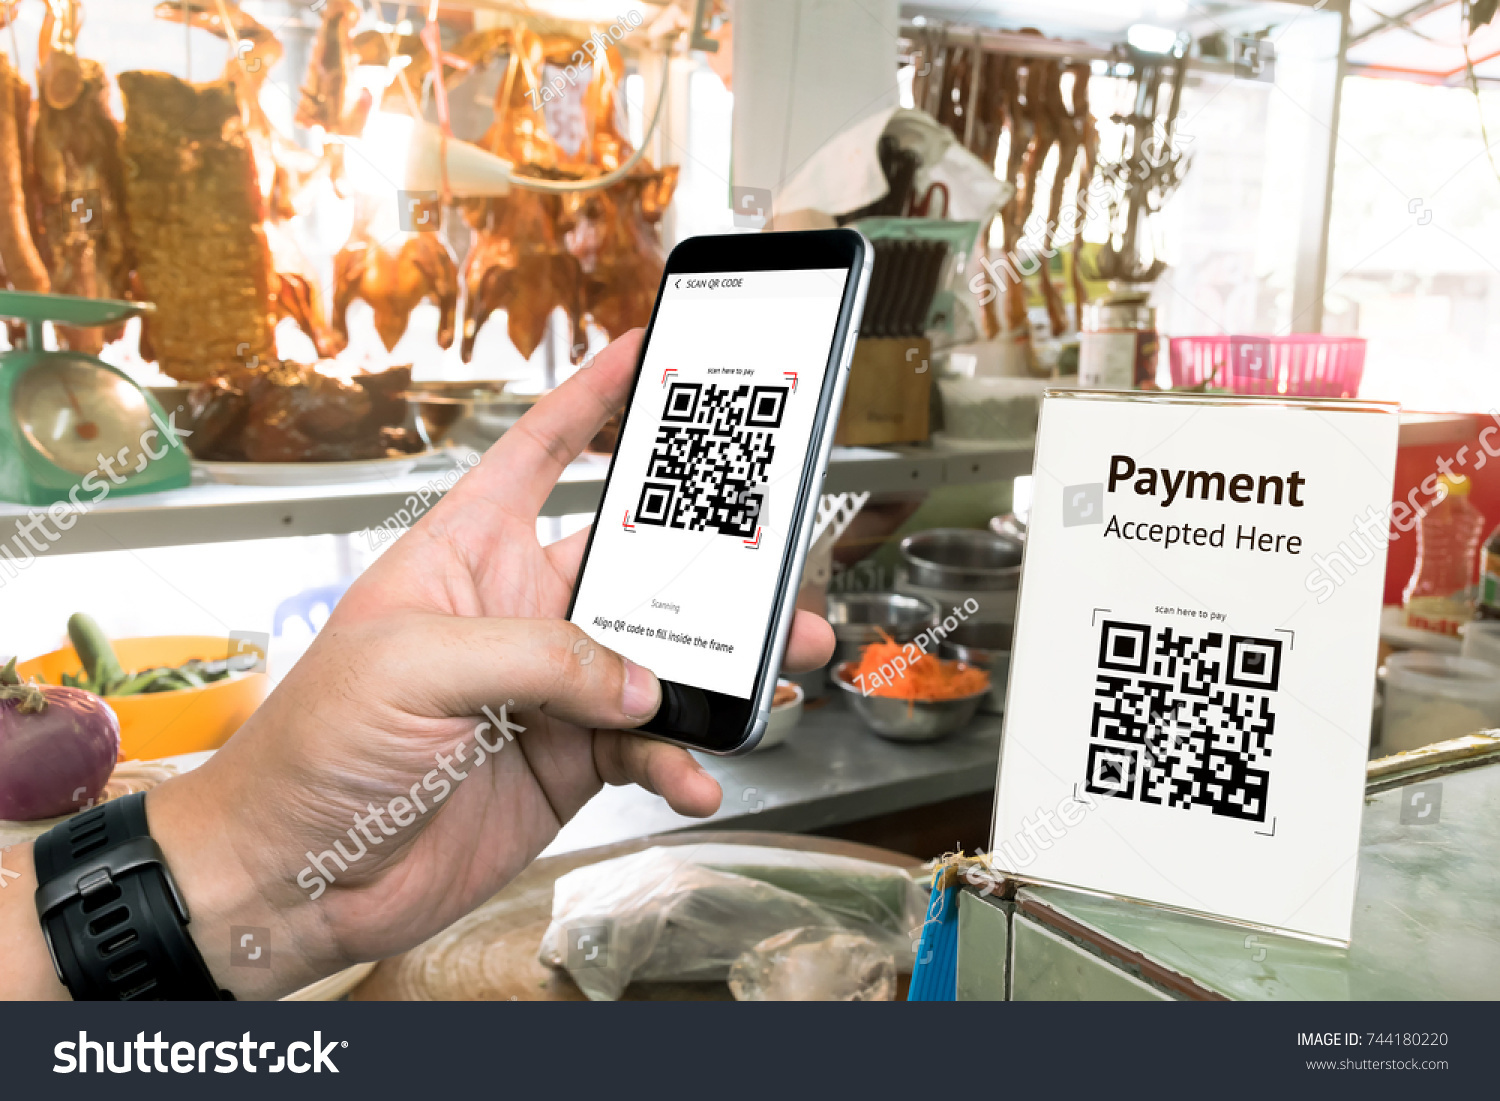 Qr code payment , online shopping , cashless technology concept. Restaurant in market accepted digital pay without money , plastic tag on table and hand using mobile phone application to scan qr code. #744180220